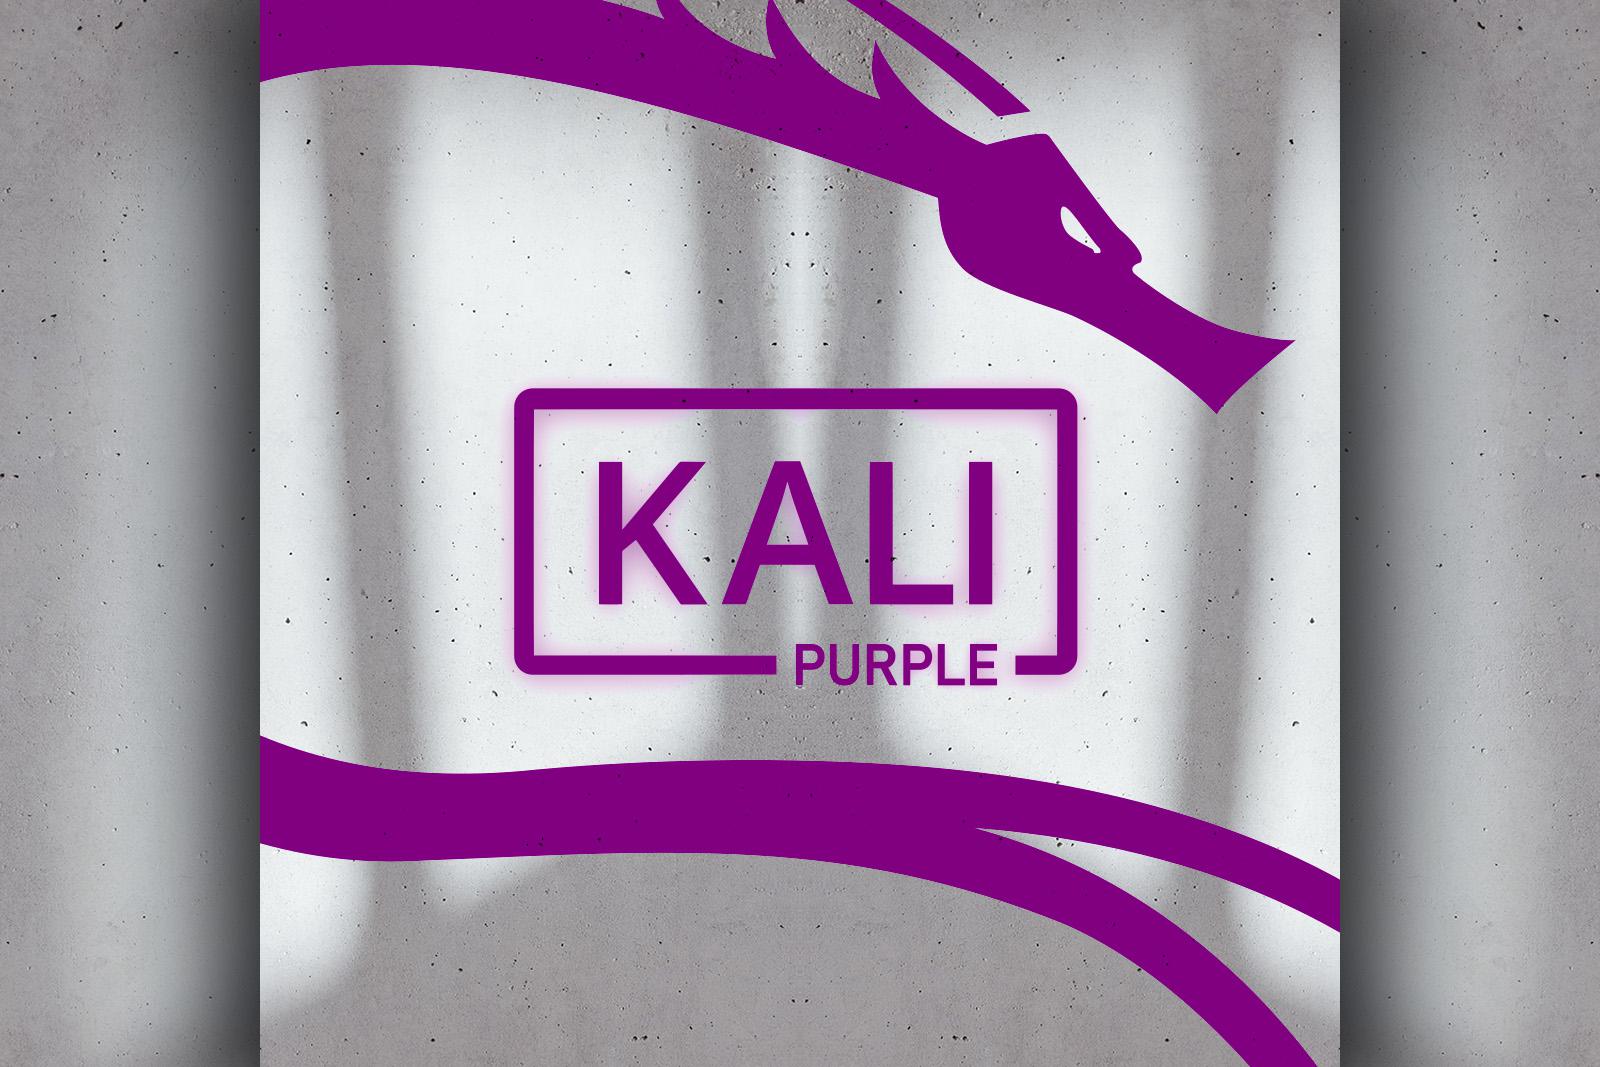 Kali Linux 2023.1 released – and so is Kali Purple!